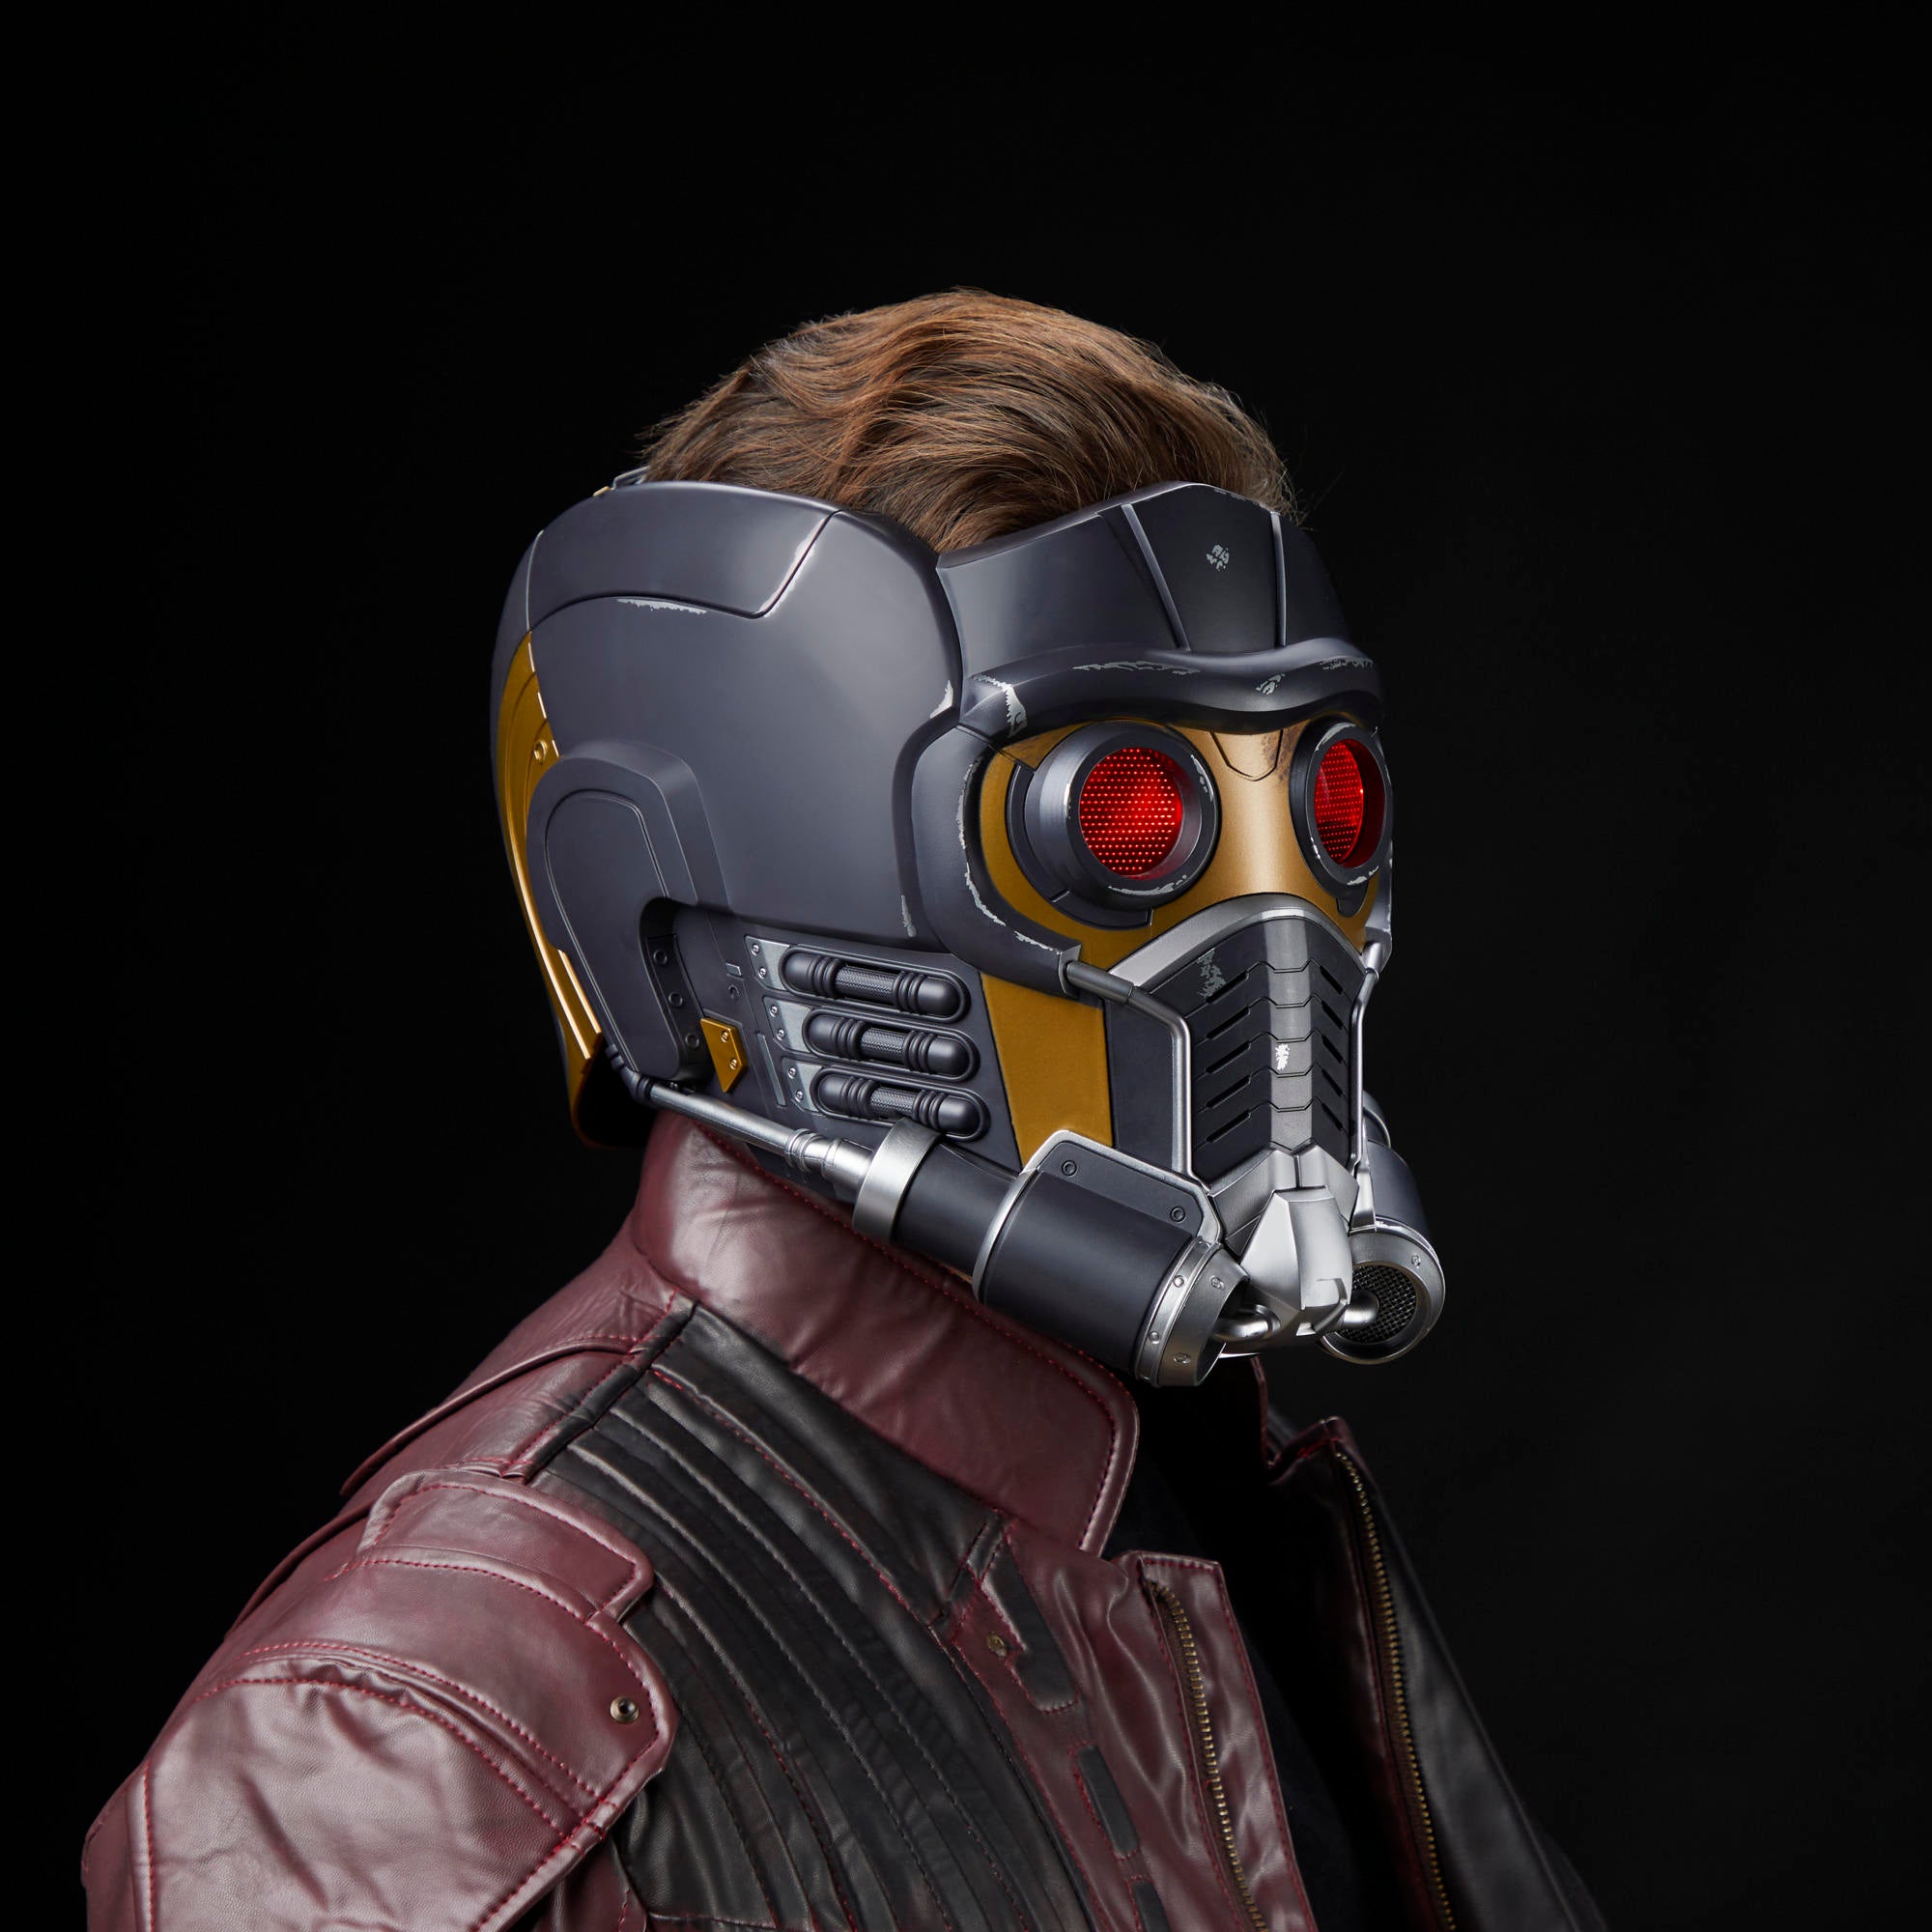 Star-Lord  Marvel Contest of Champions